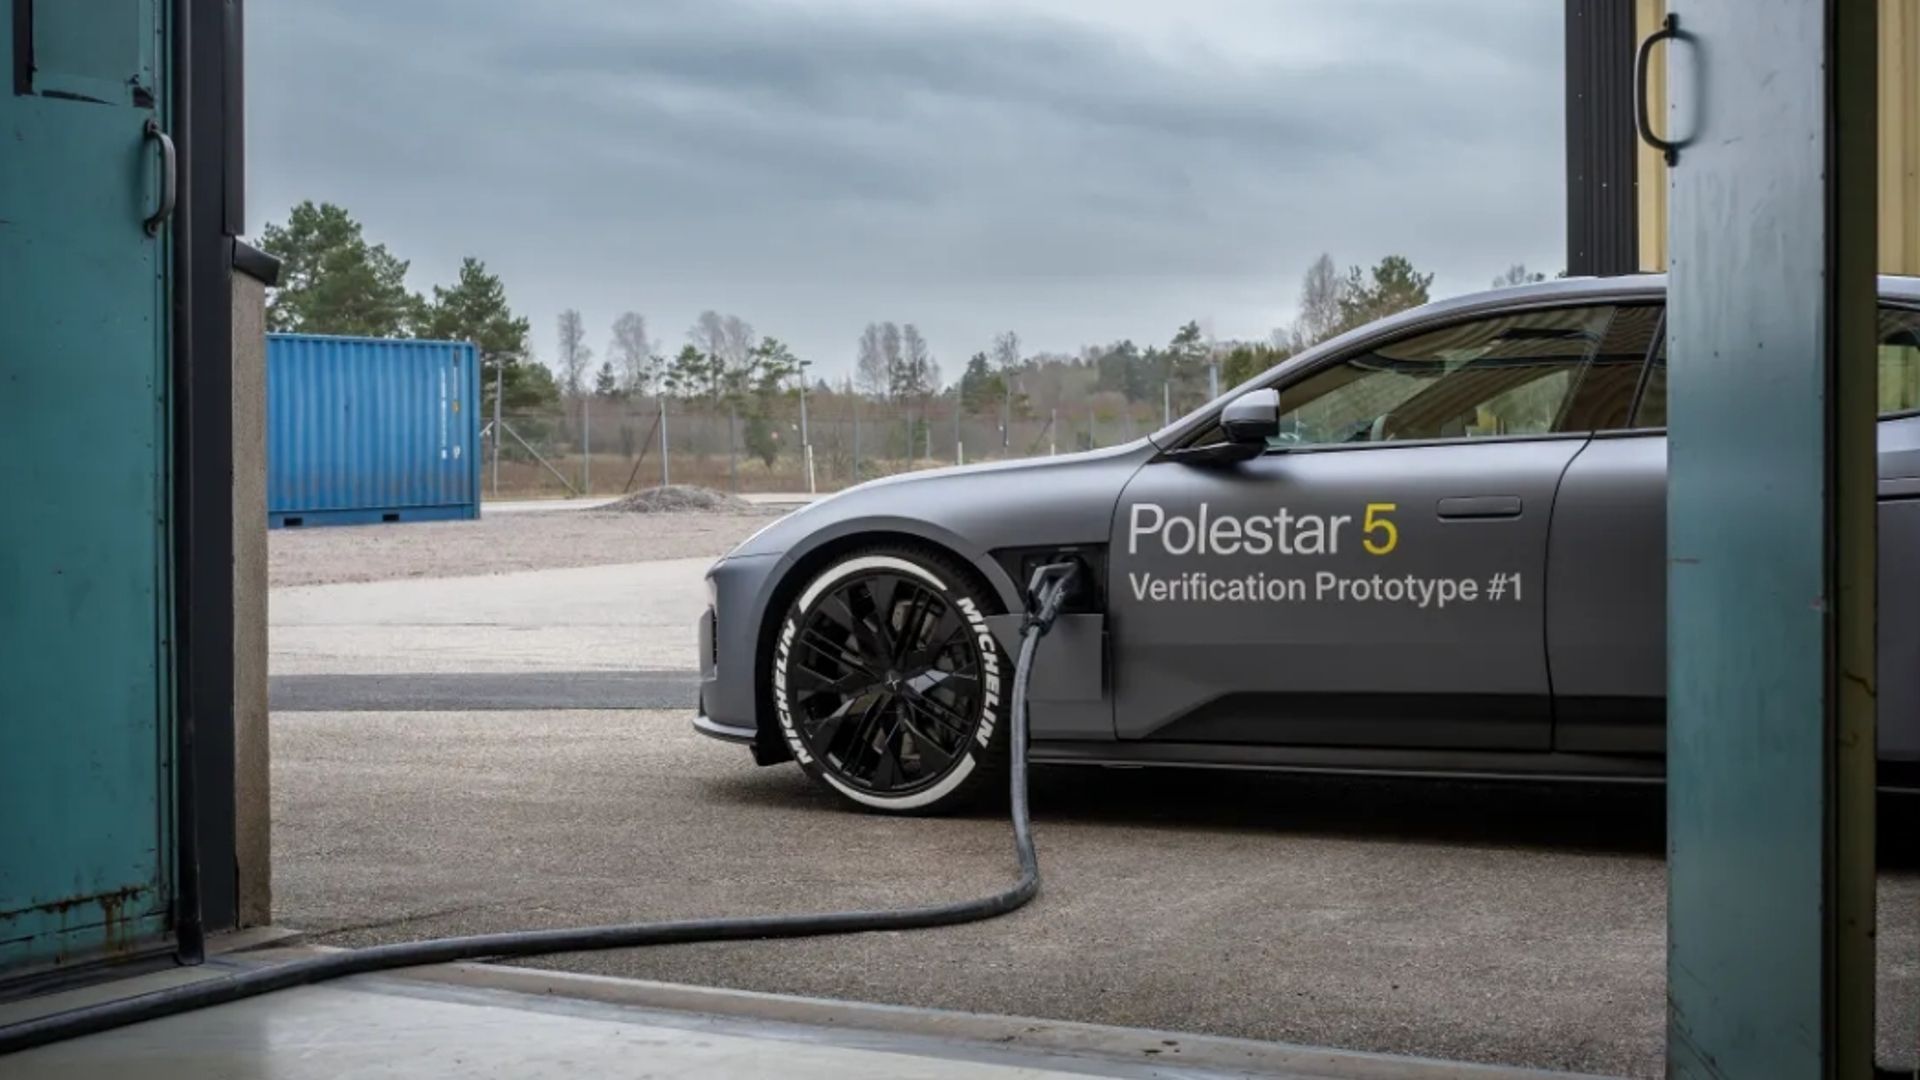 Polestar 5 prototype charged from 10-80% in just 10 minutes (Source: Polestar)